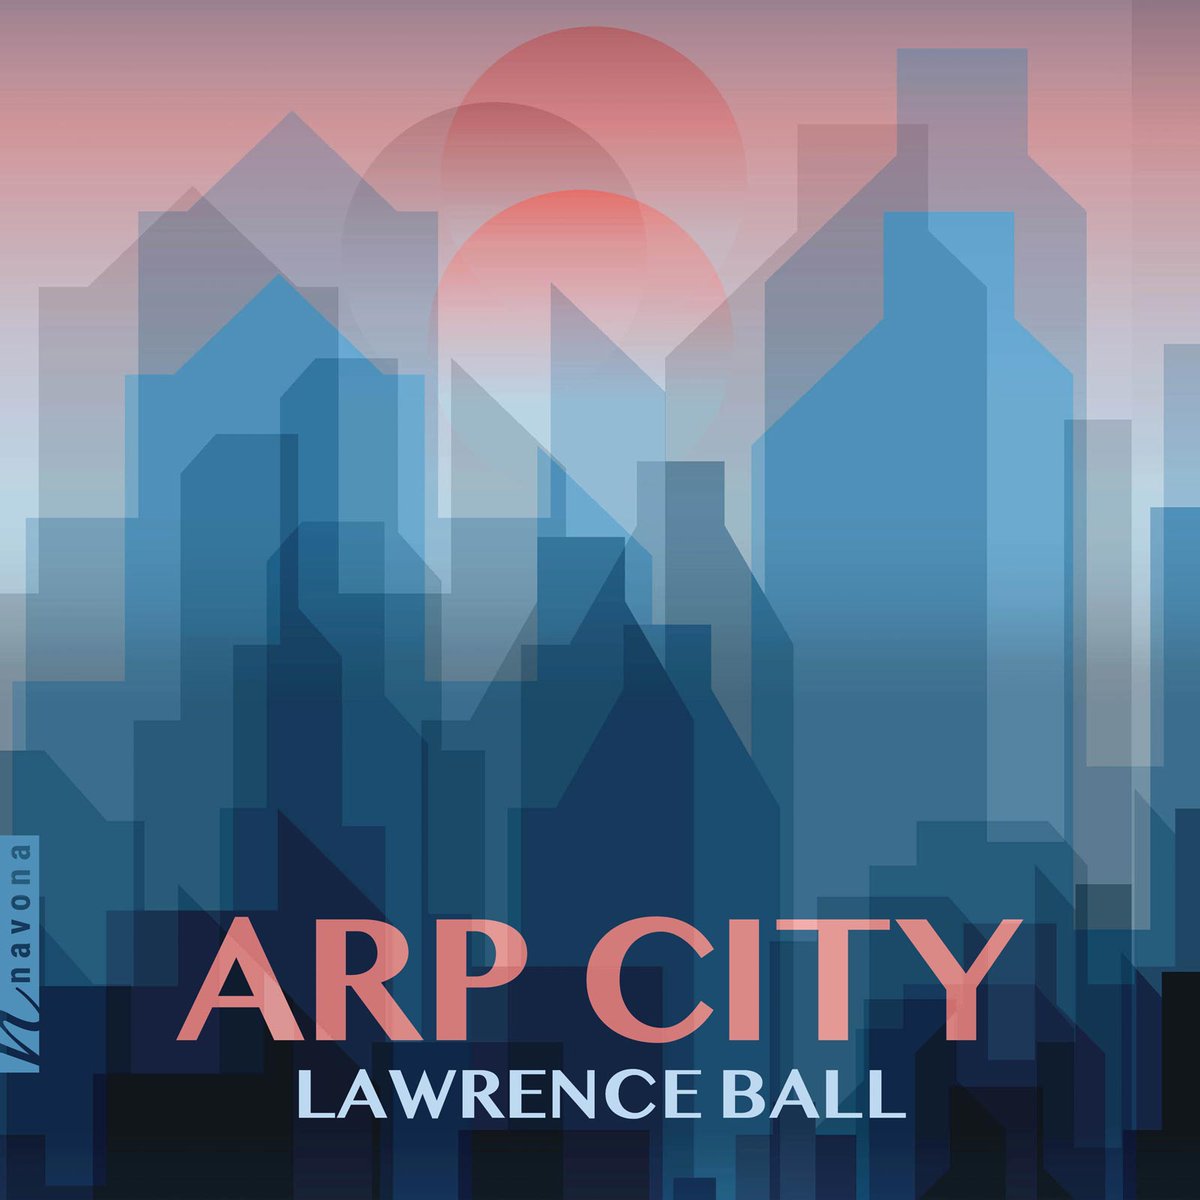 Experience the synthesizers, layered soundscapes, and whimsical human creativity of composer Lawrence Ball's ARP CITY live at @IronworksBTN on Wednesday, May 15. Tickets and more information here via @brightonfringe. brightonfringe.org/events/multise…